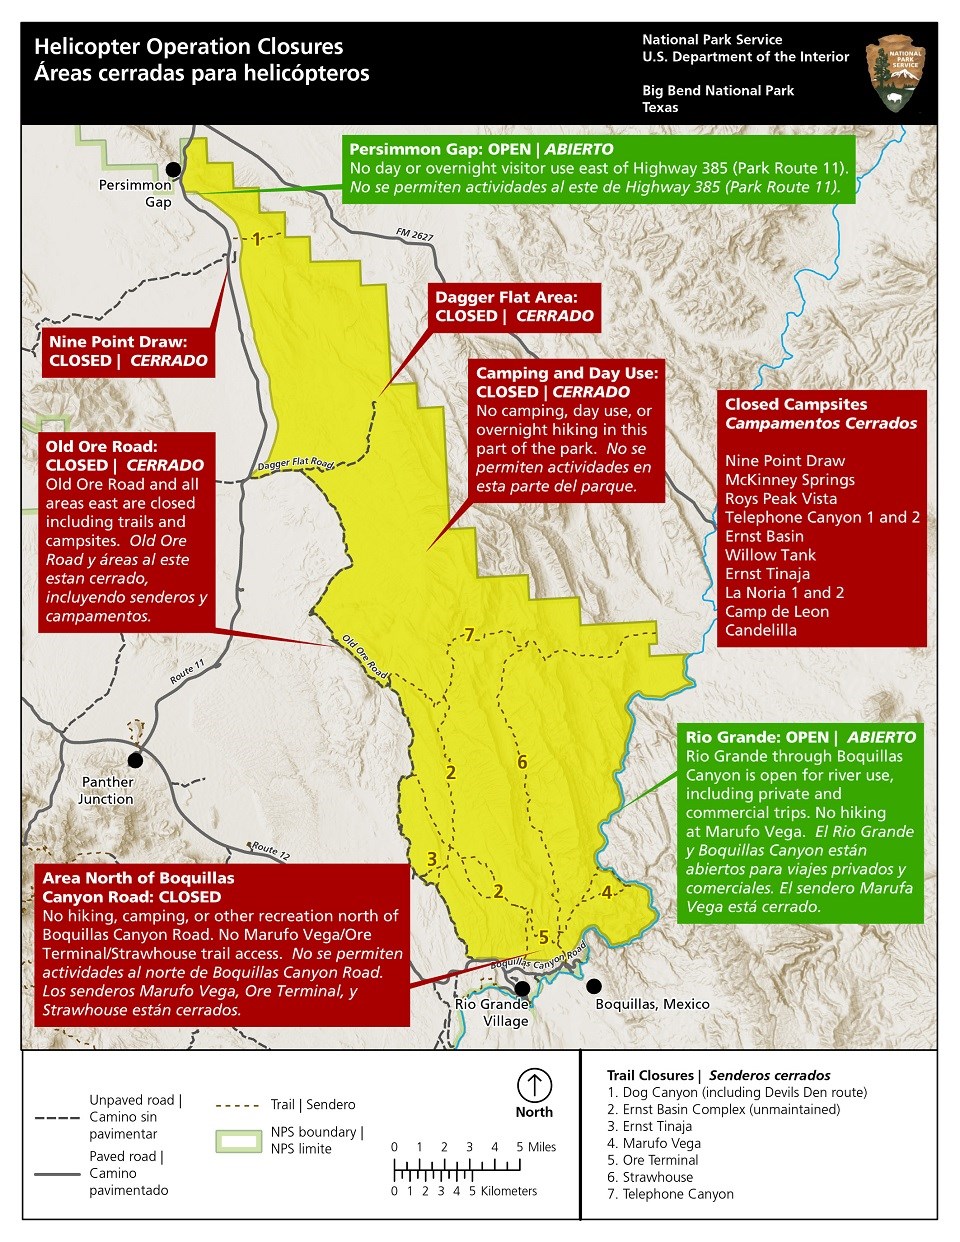 Map of closure areas for aoudad survey